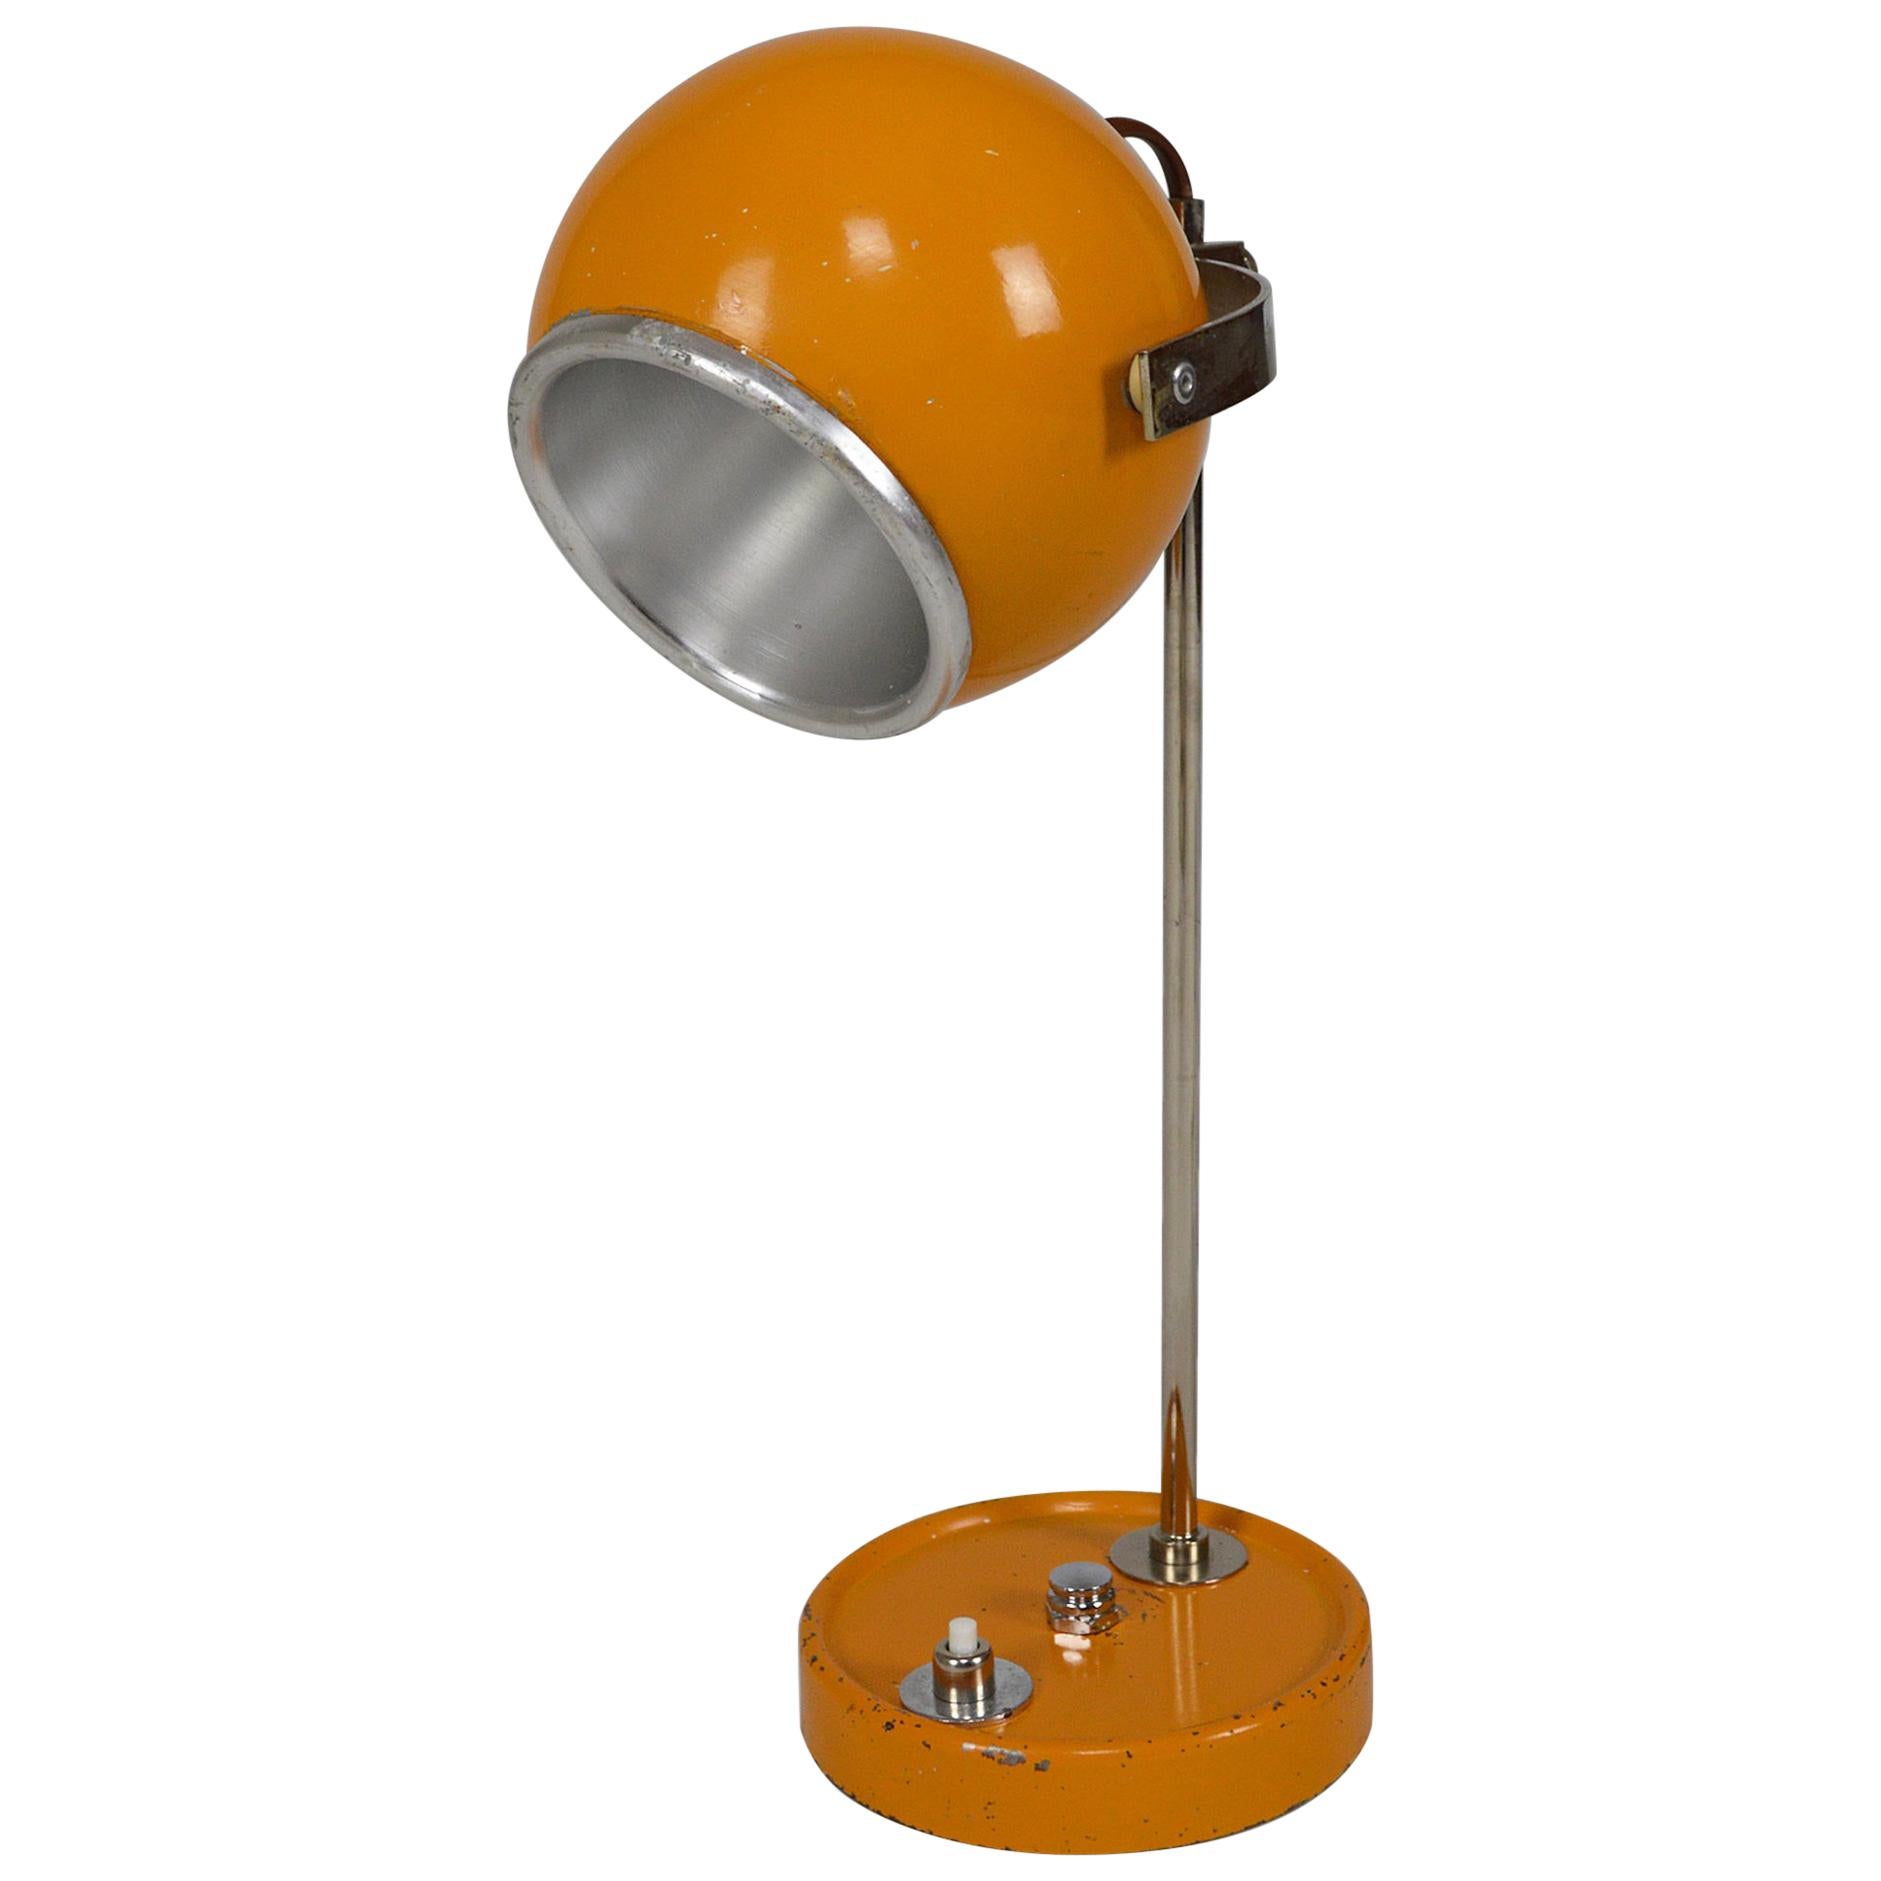 Midcentury Table or Desk Space Age "Eyeball" Lamp , 1960s, France, by Disderot For Sale